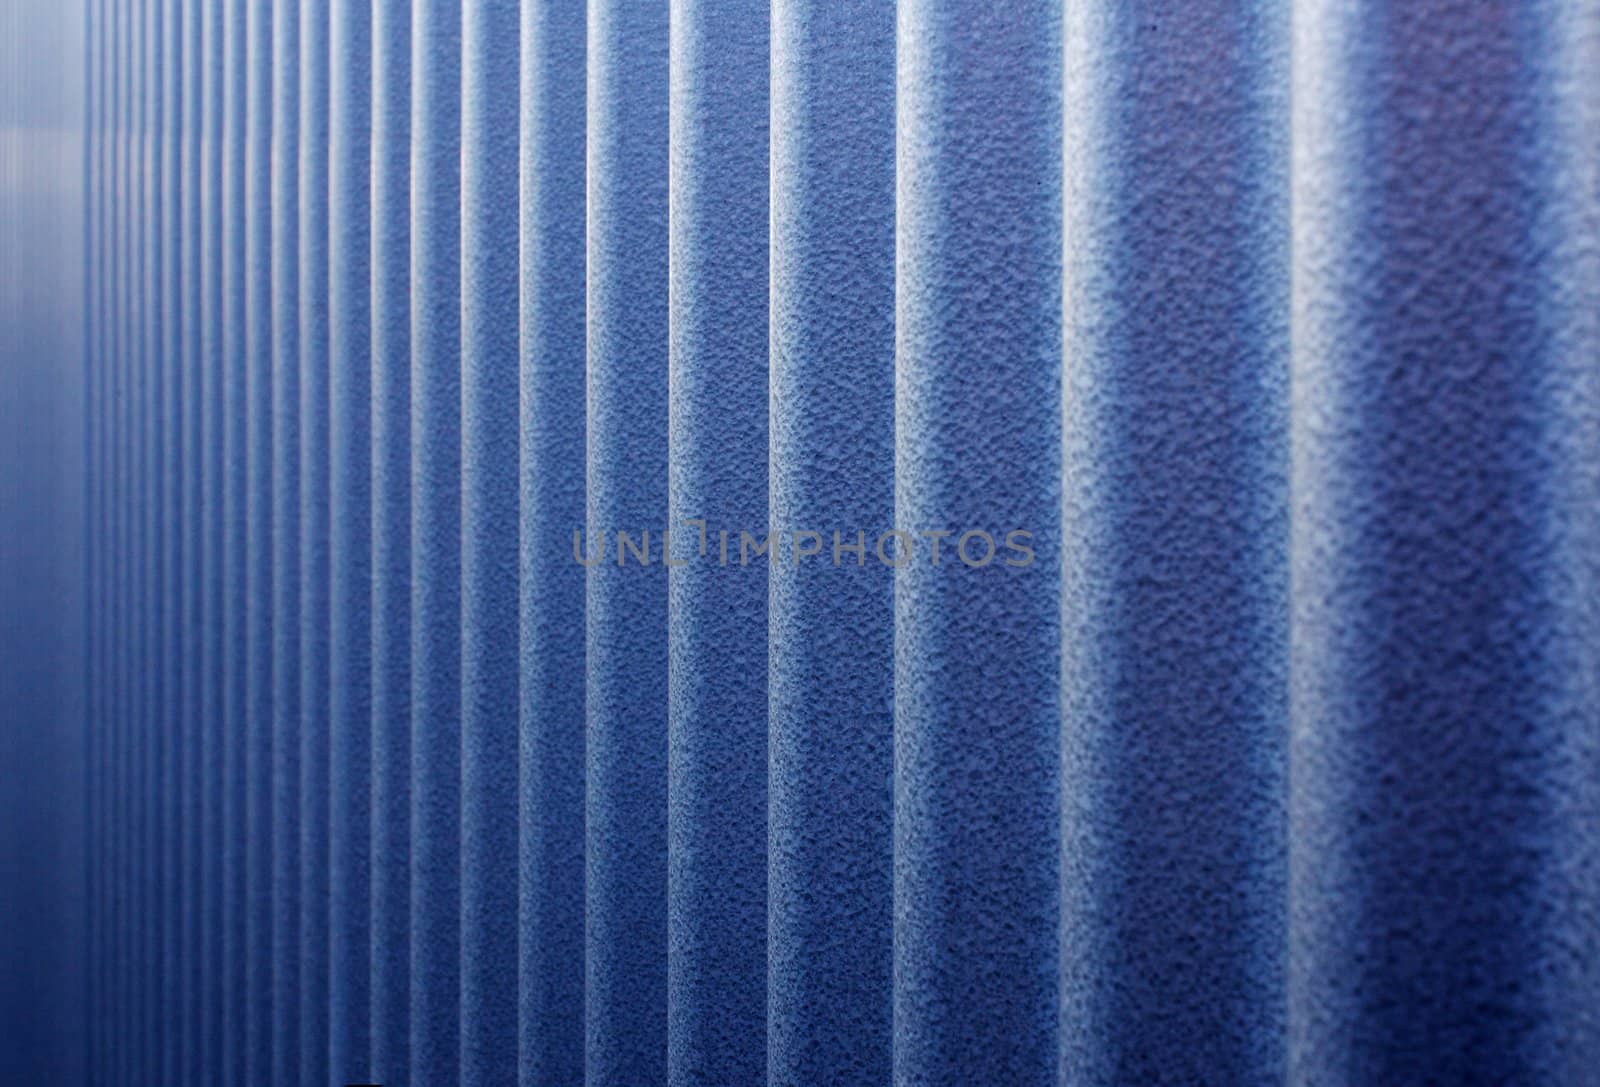 Vulcanized corrugated steel wall that looks like it diminished to infinity